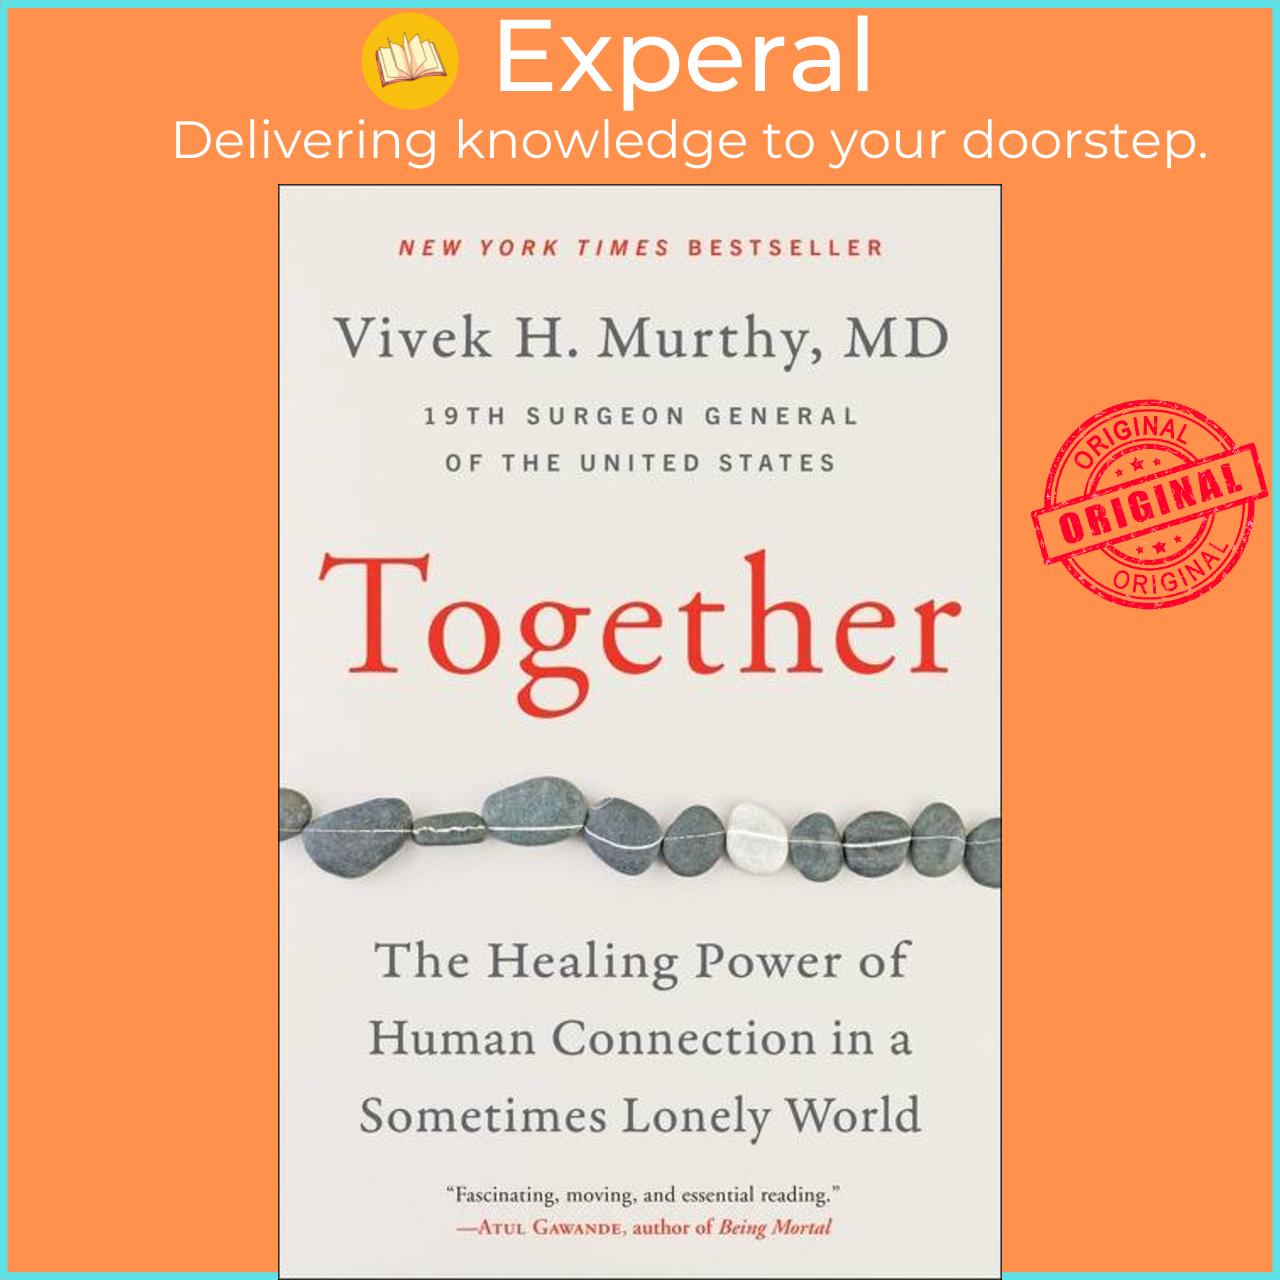 Sách - Together - The Healing Power of Human Connection in a Sometimes Lonely World by Vivek H. Murthy, M.D. (paperback)